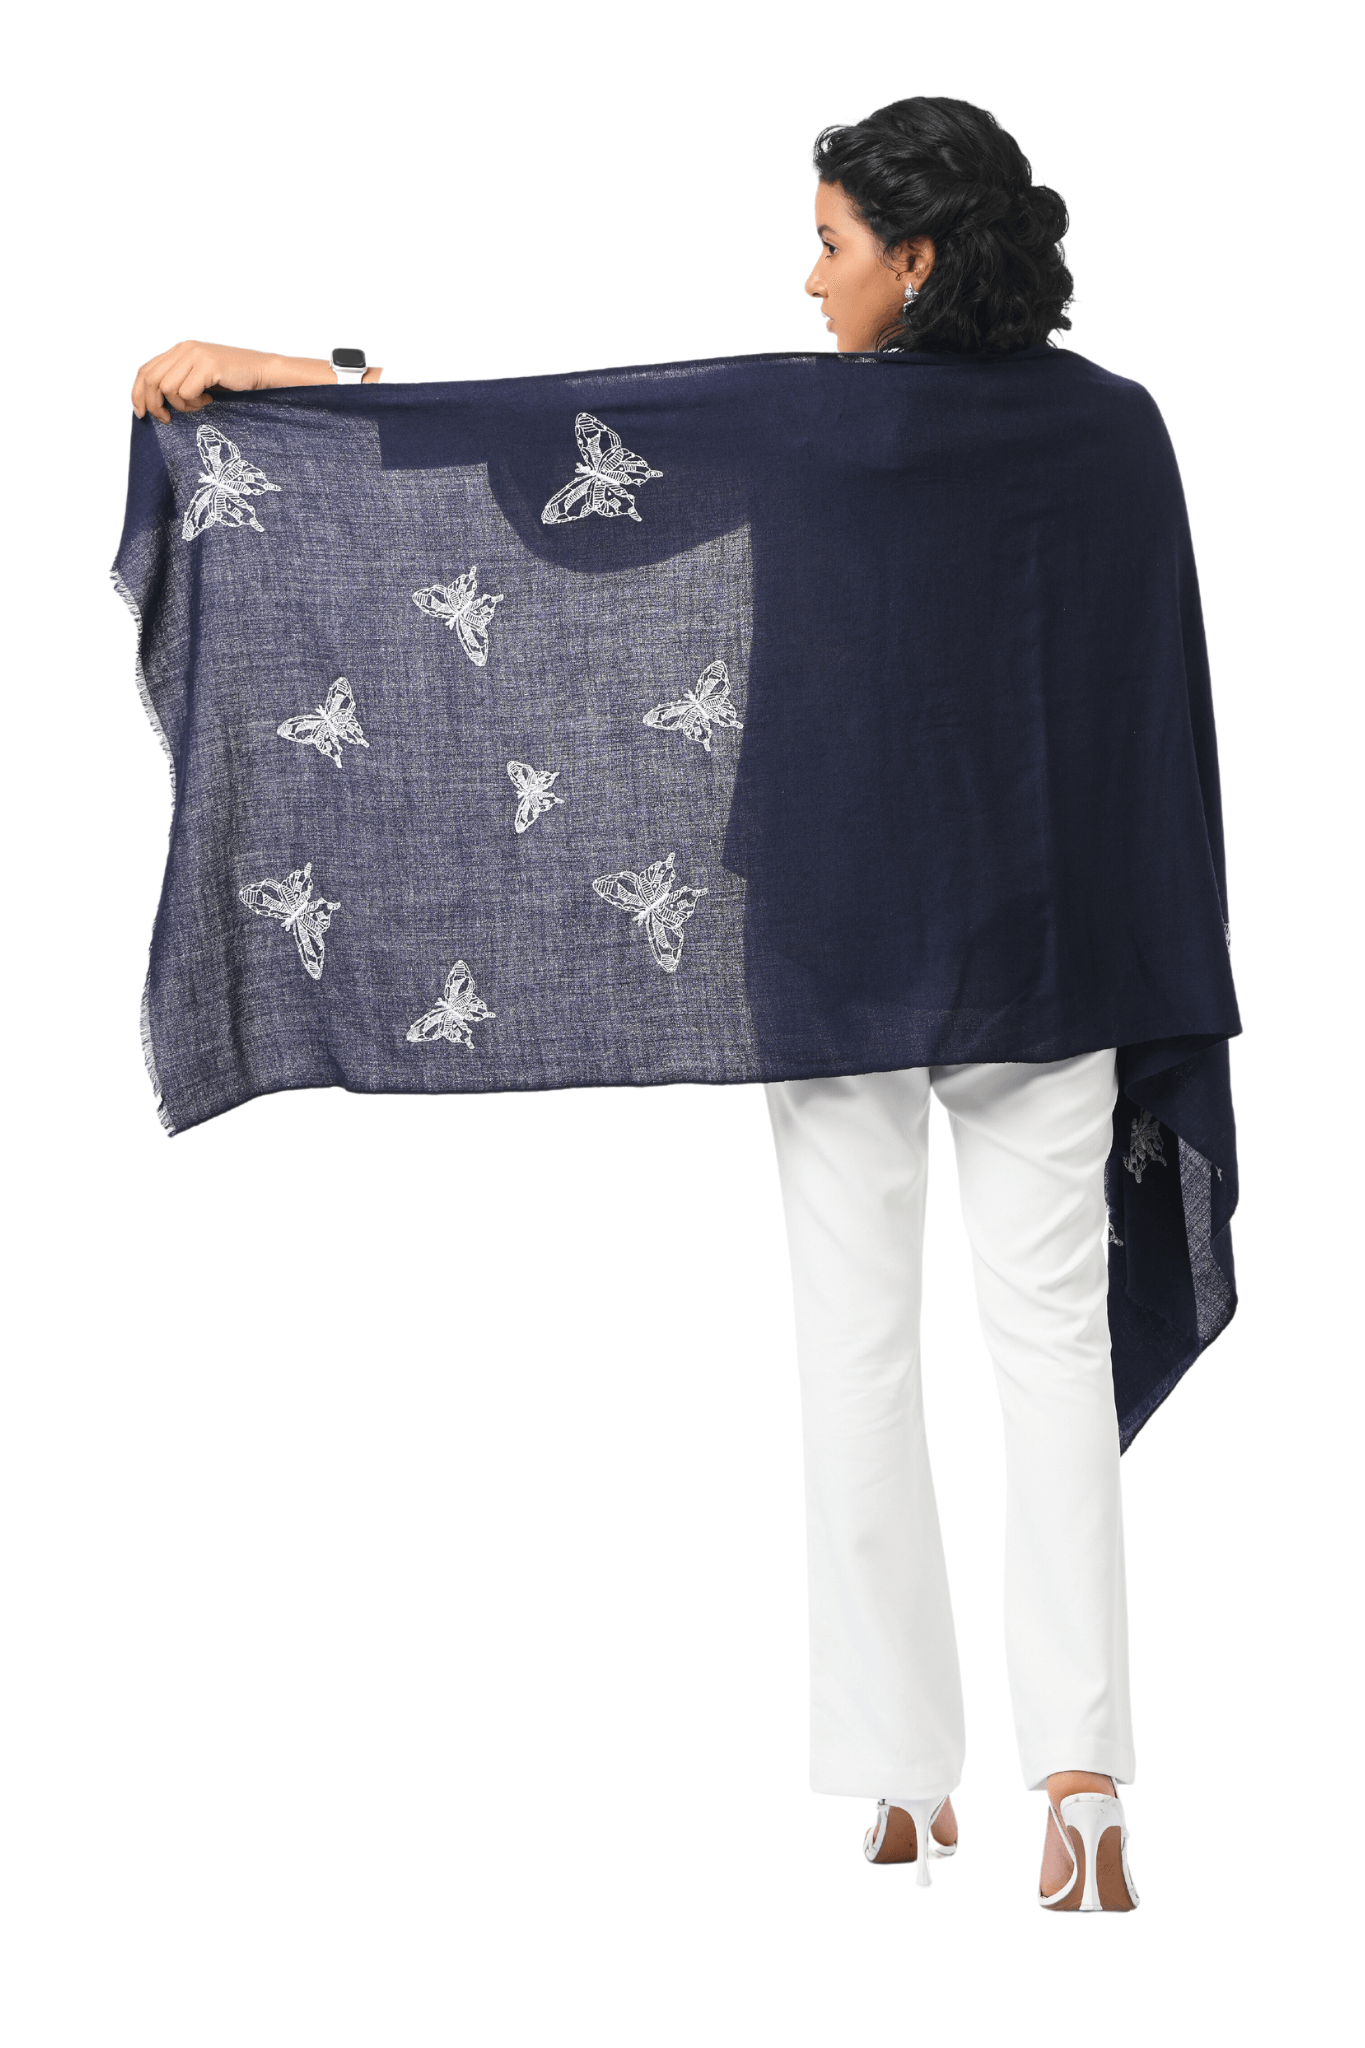 Homing Butterflies Cashmere Scarf